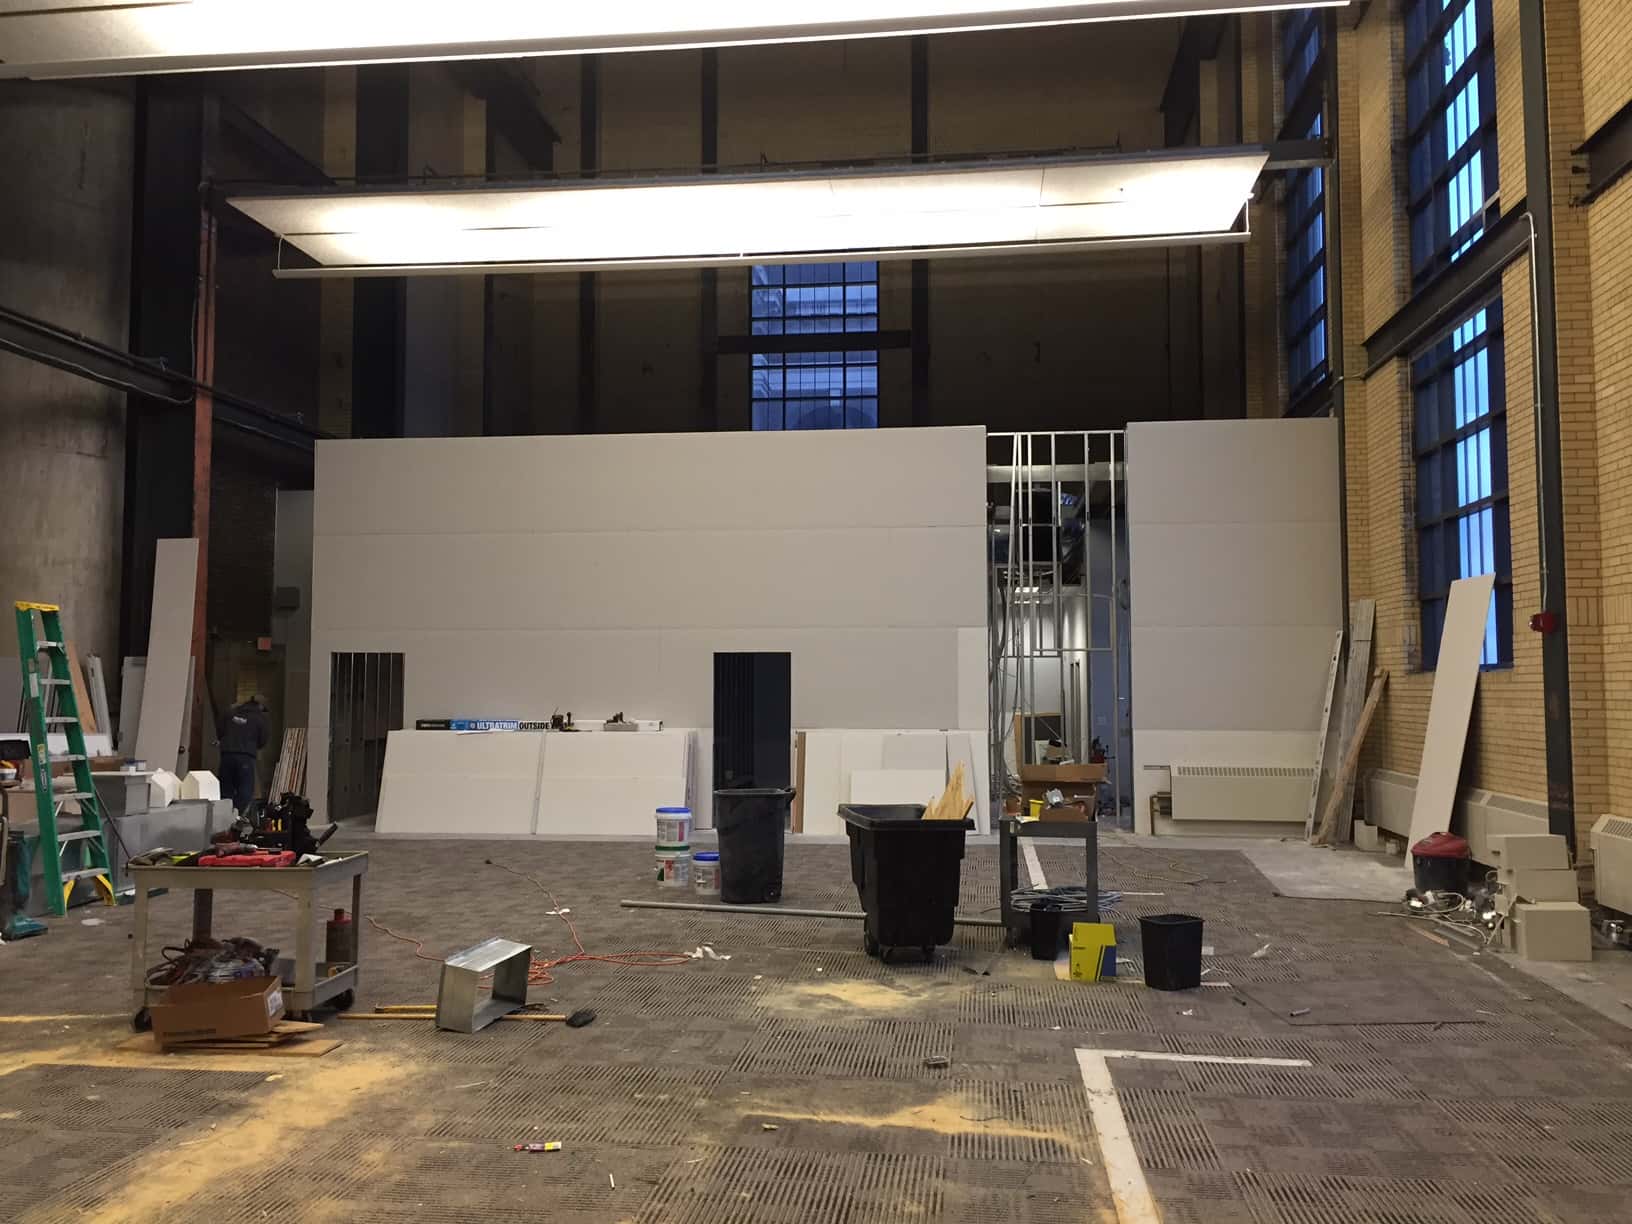 during renovation of synygy turbine hall